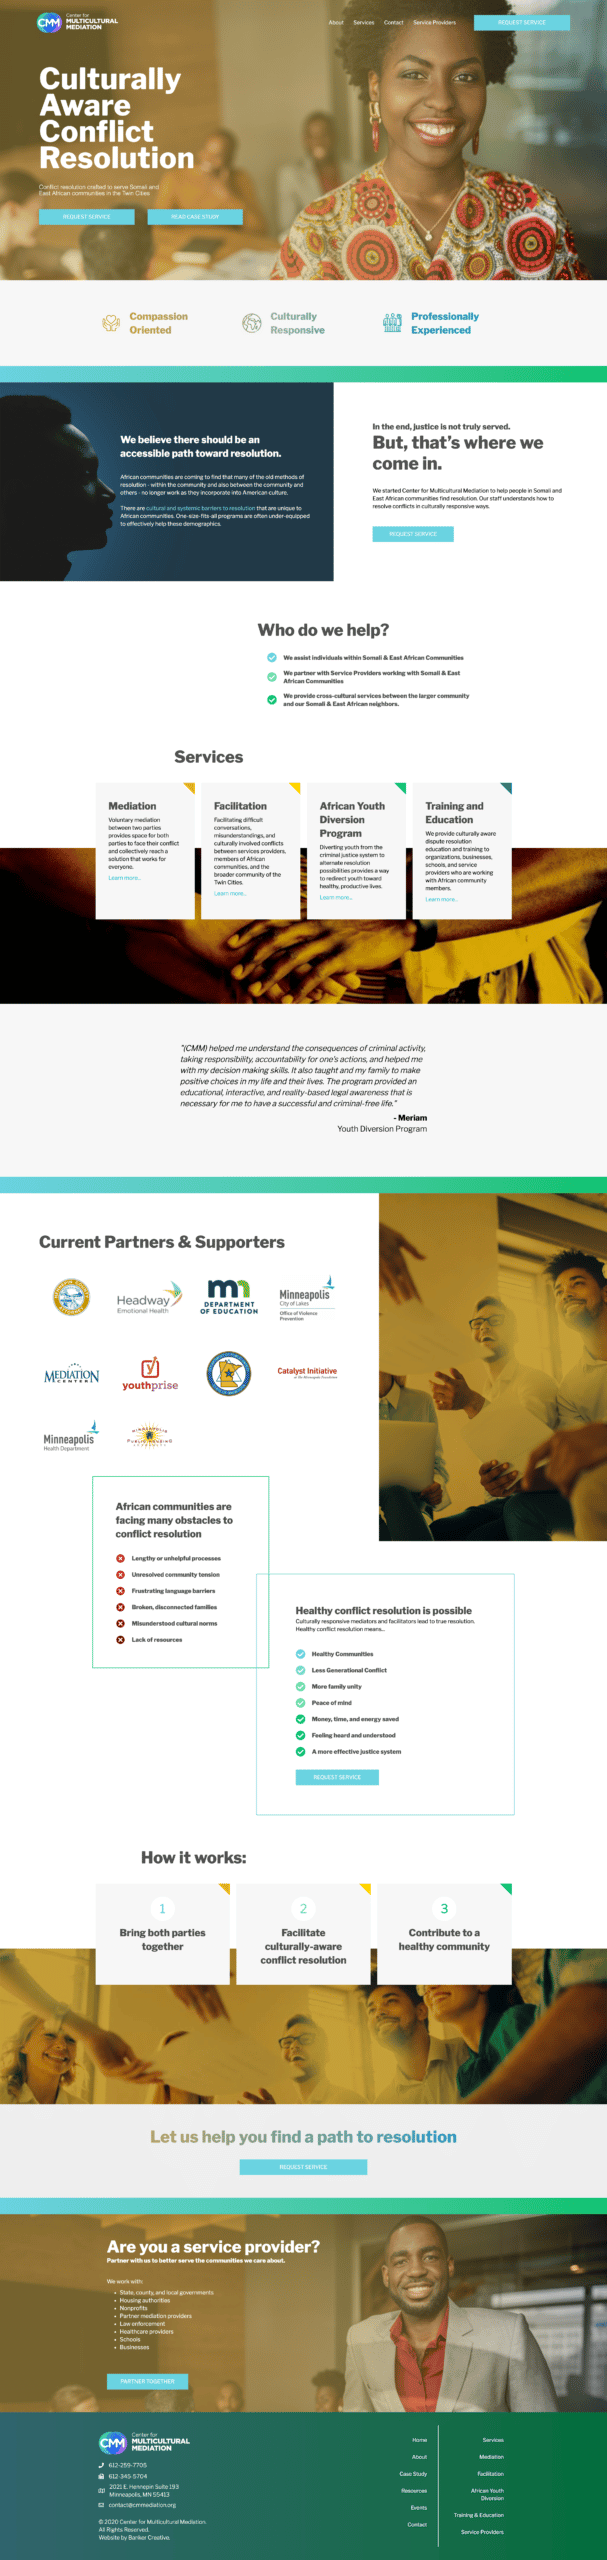 Full page screenshot of the Center for Multicultural Mediation's homepage.